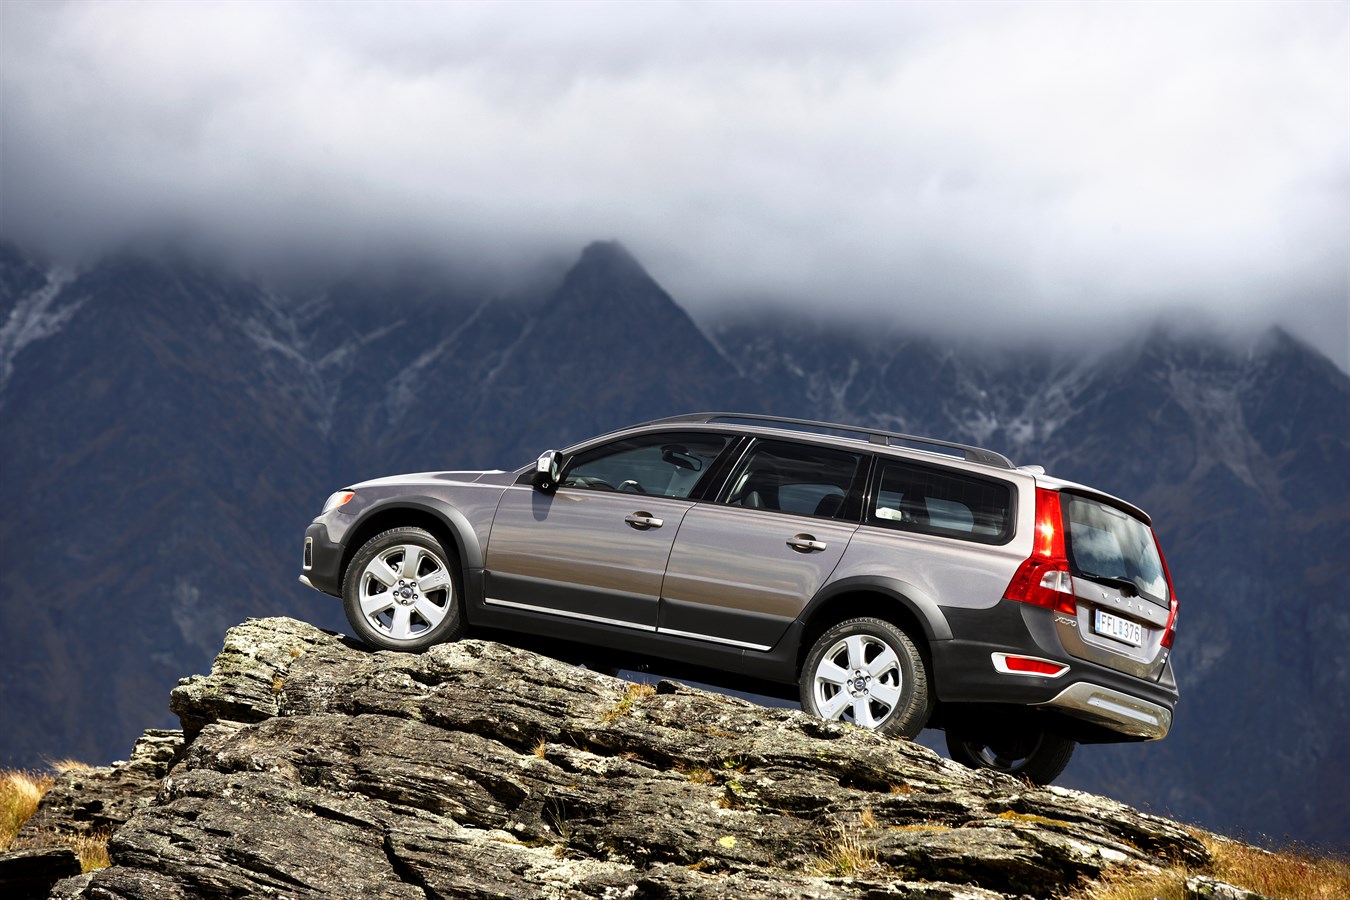 The all-new XC70